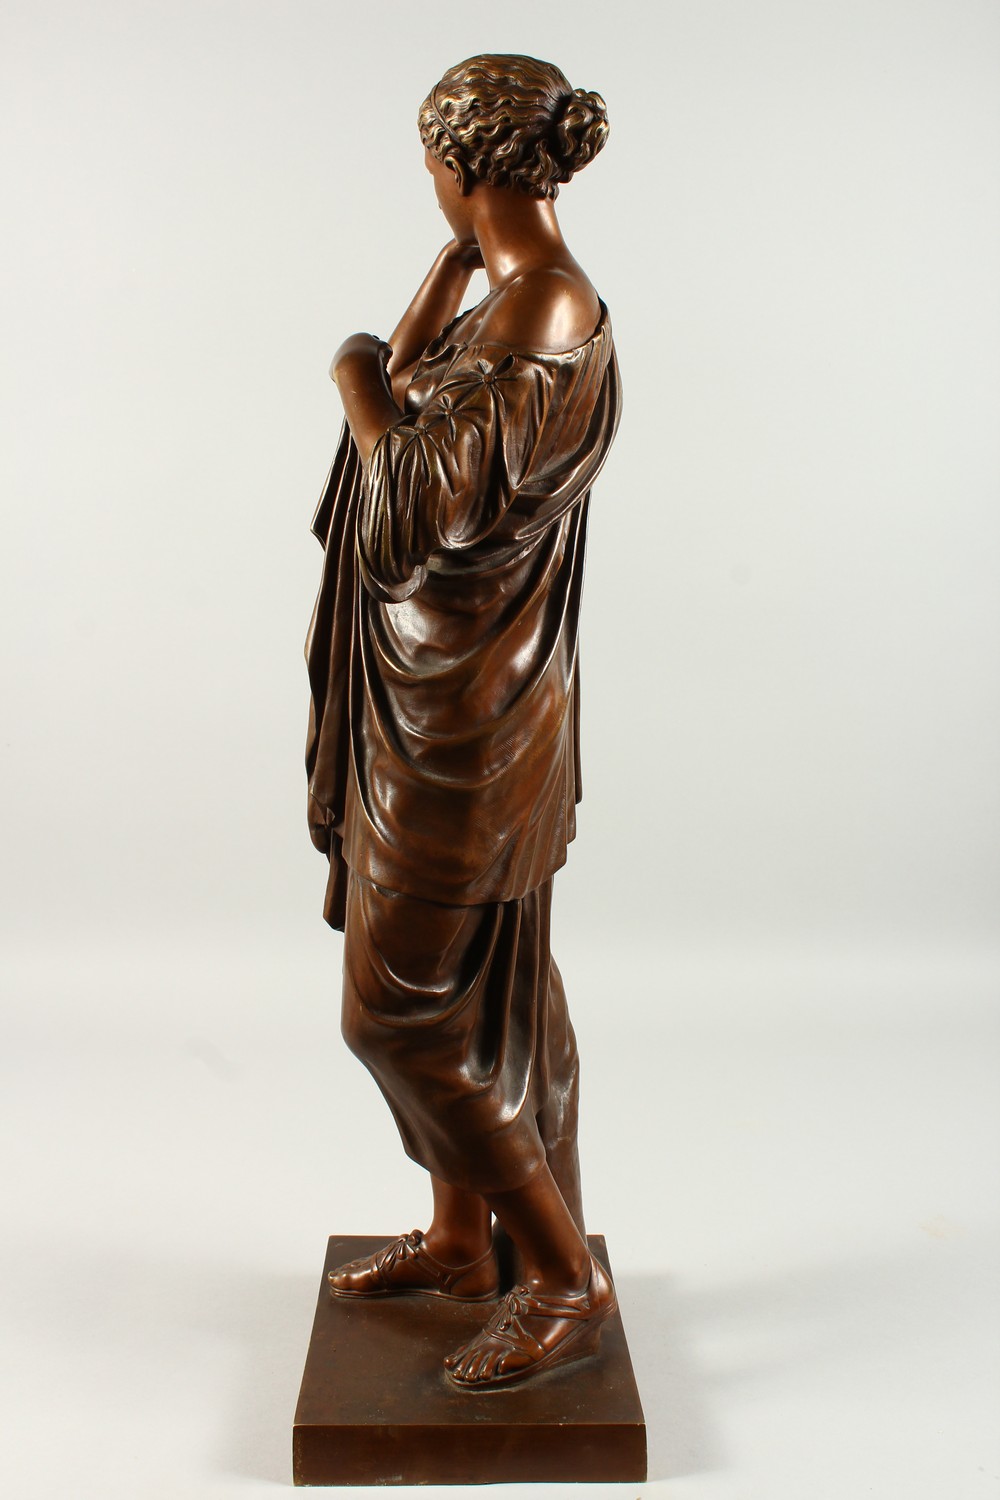 19TH CENTURY ITALIAN SCHOOL. A STANDING BRONZE OF A CLASSICAL LADY on a square base. 68cms high. - Image 5 of 9